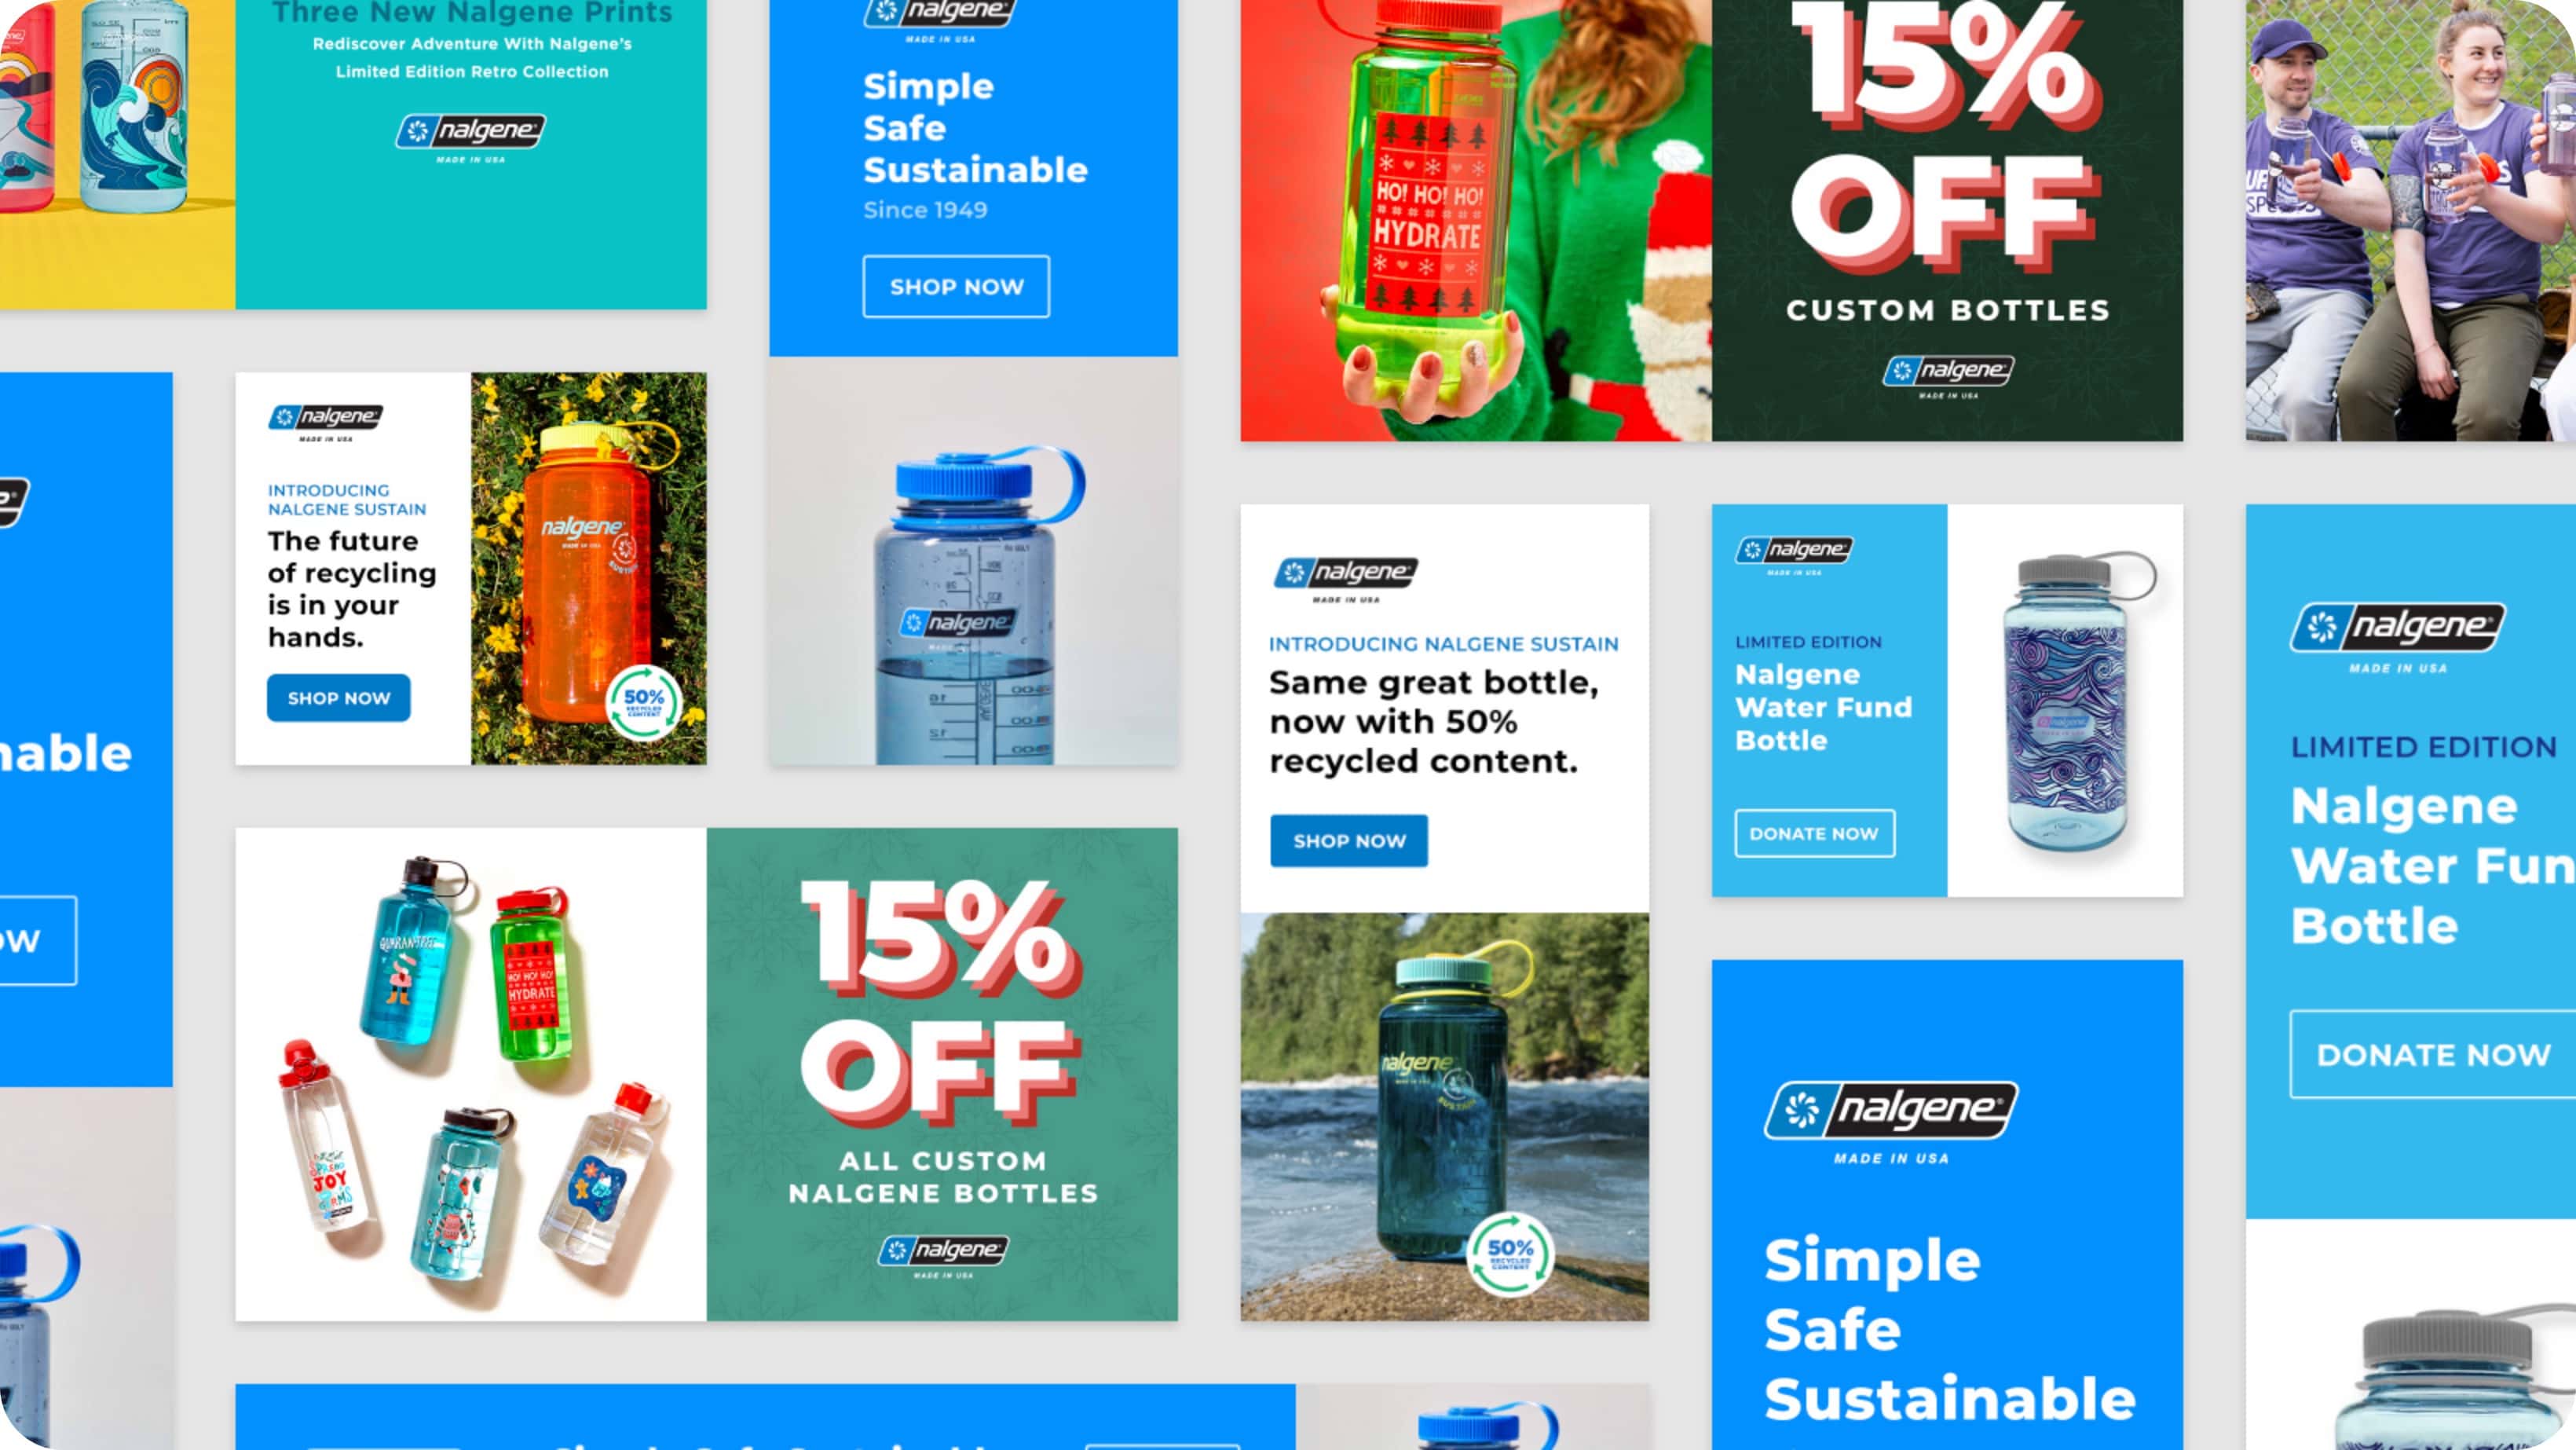 image from Nalgene's website with various pictures of water bottles and promos for 15% off custom bottles. Various marketing images.